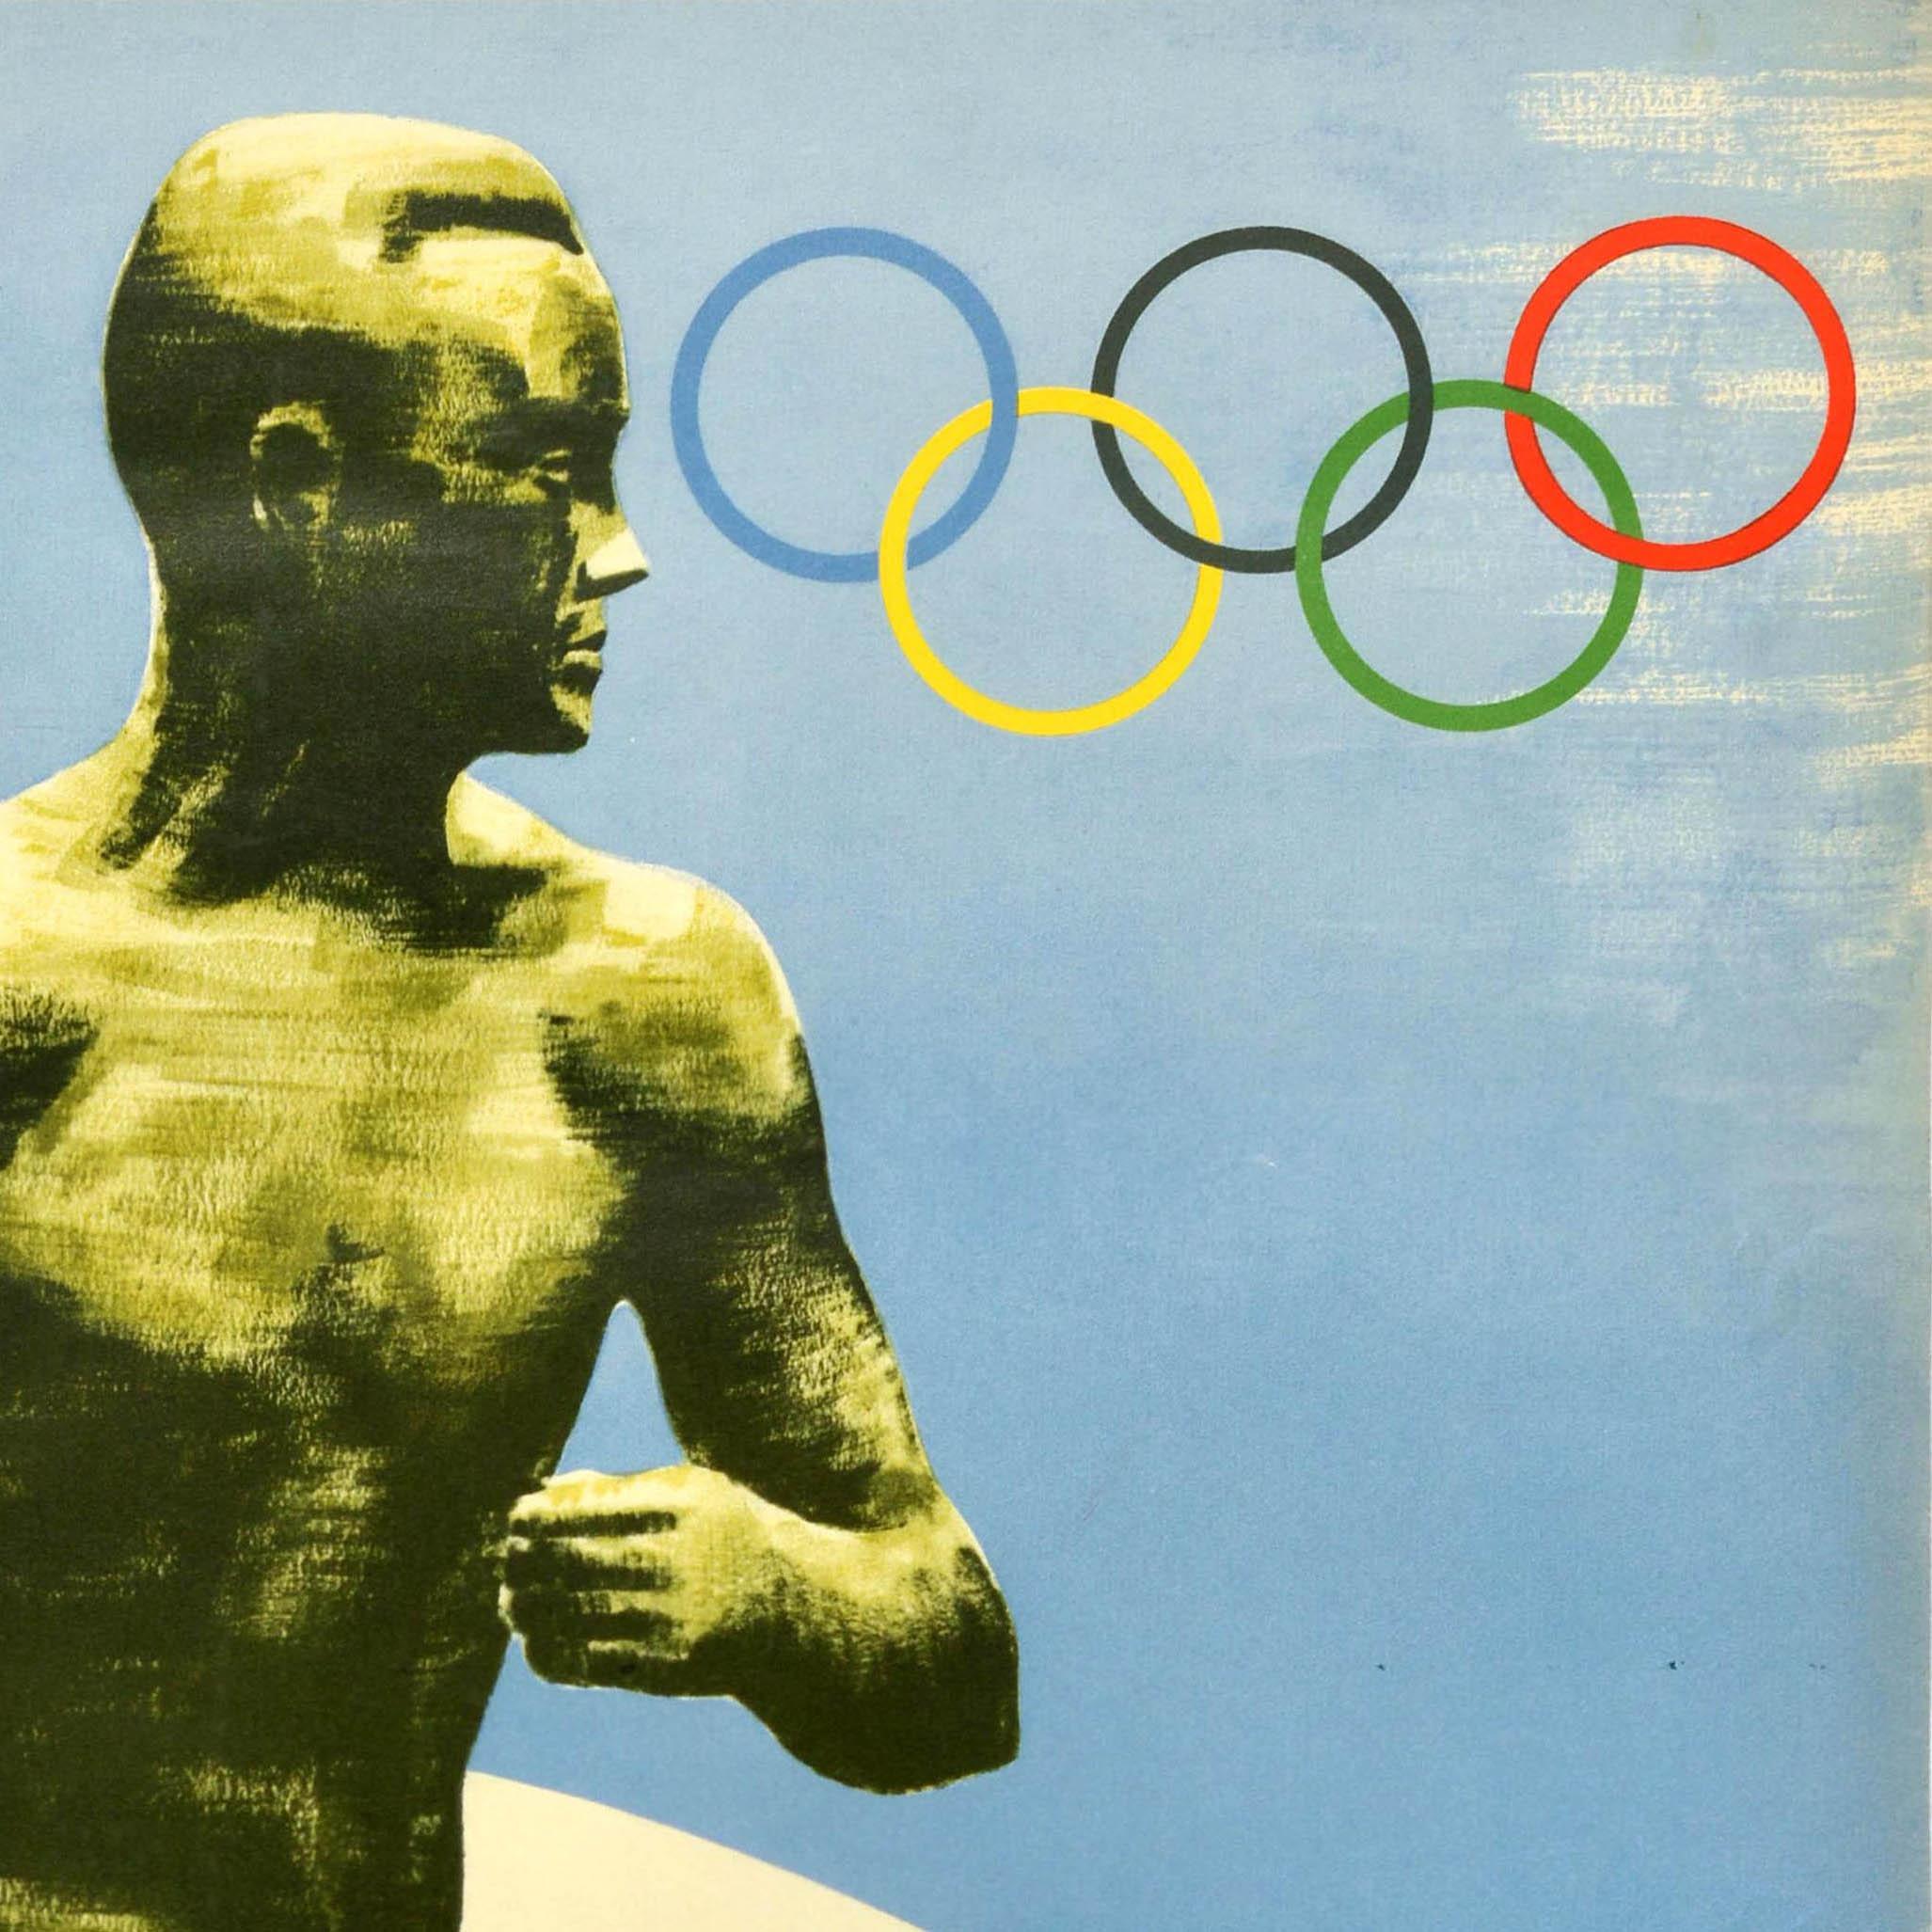 Original Vintage Sports Poster Olympic Games Helsinki 1940 Finland Athlete In Good Condition For Sale In London, GB